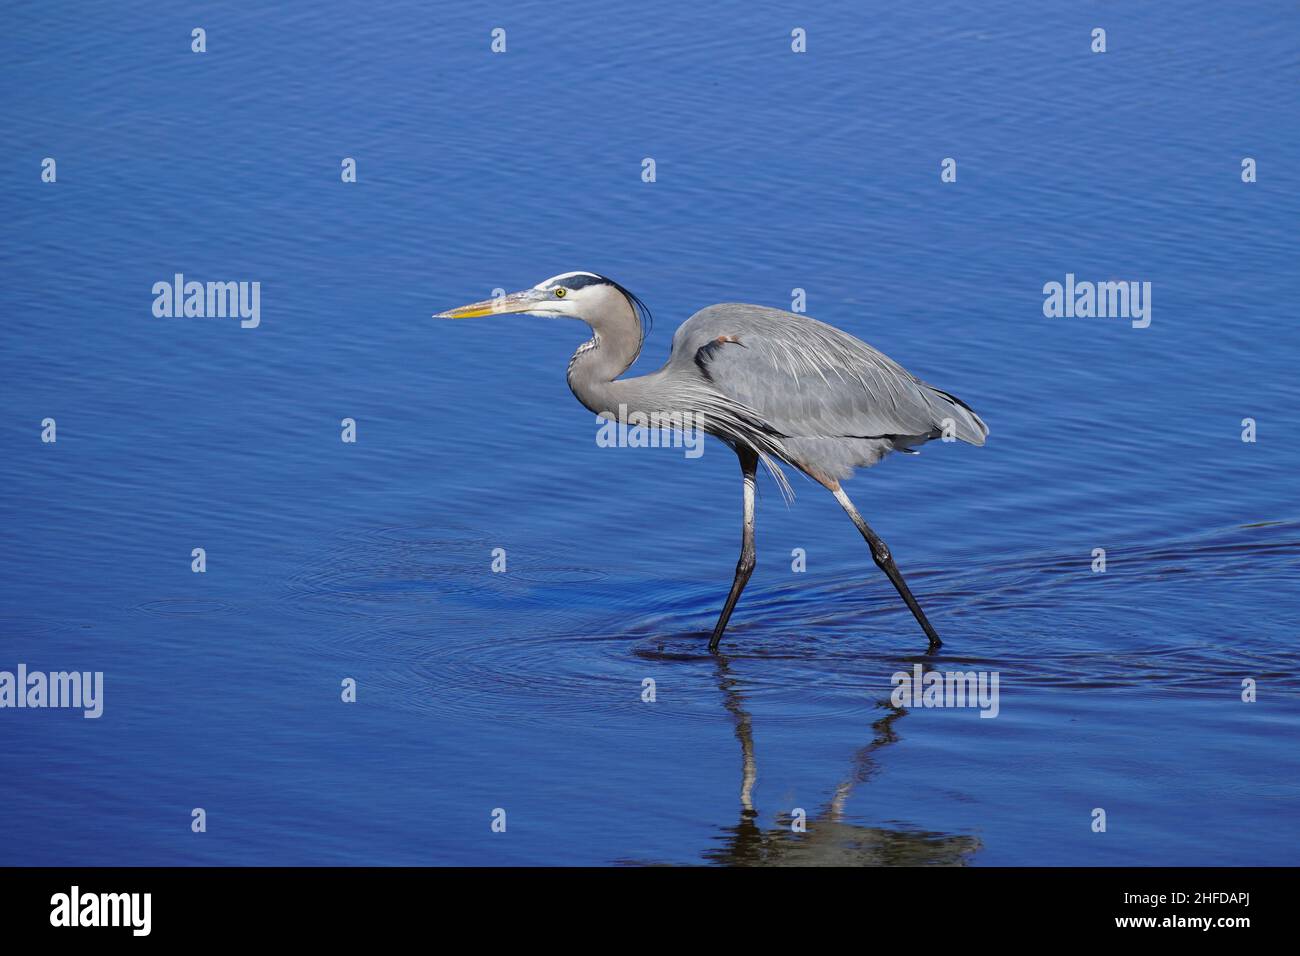 Great Blue Heron, Ardea herodias, wading and fishing in shallow water Stock Photo